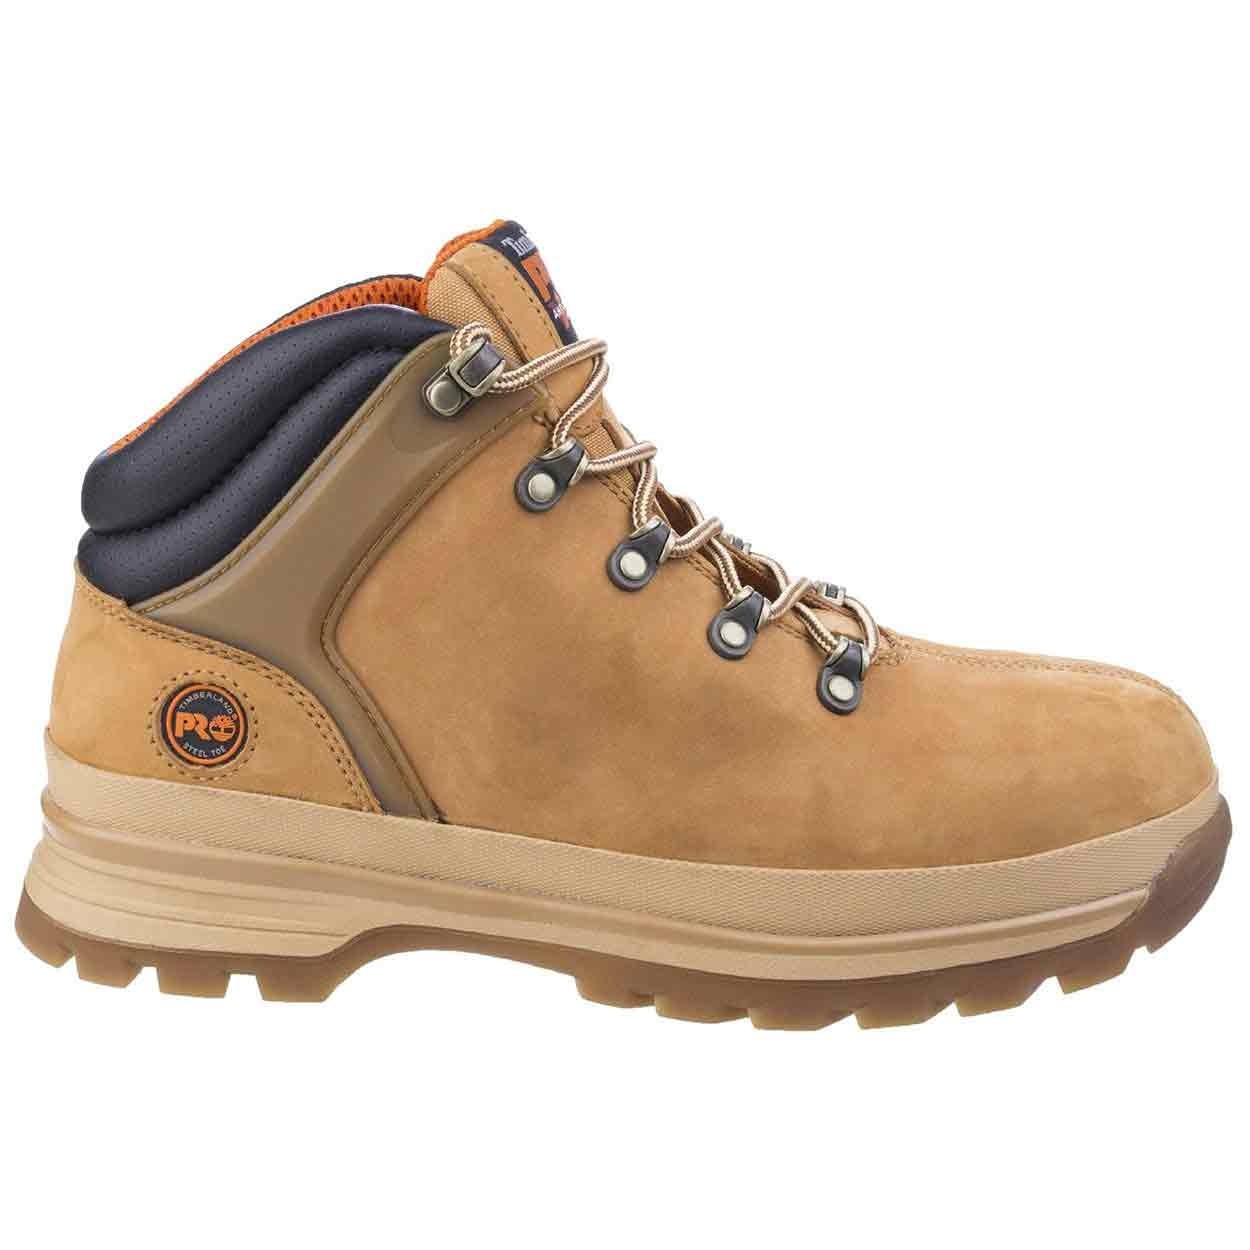 Timberland Pro Splitrock XT - Standard Safety Boots - Mens Safety Boots &  Shoes - Safety Footwear - Best Workwear